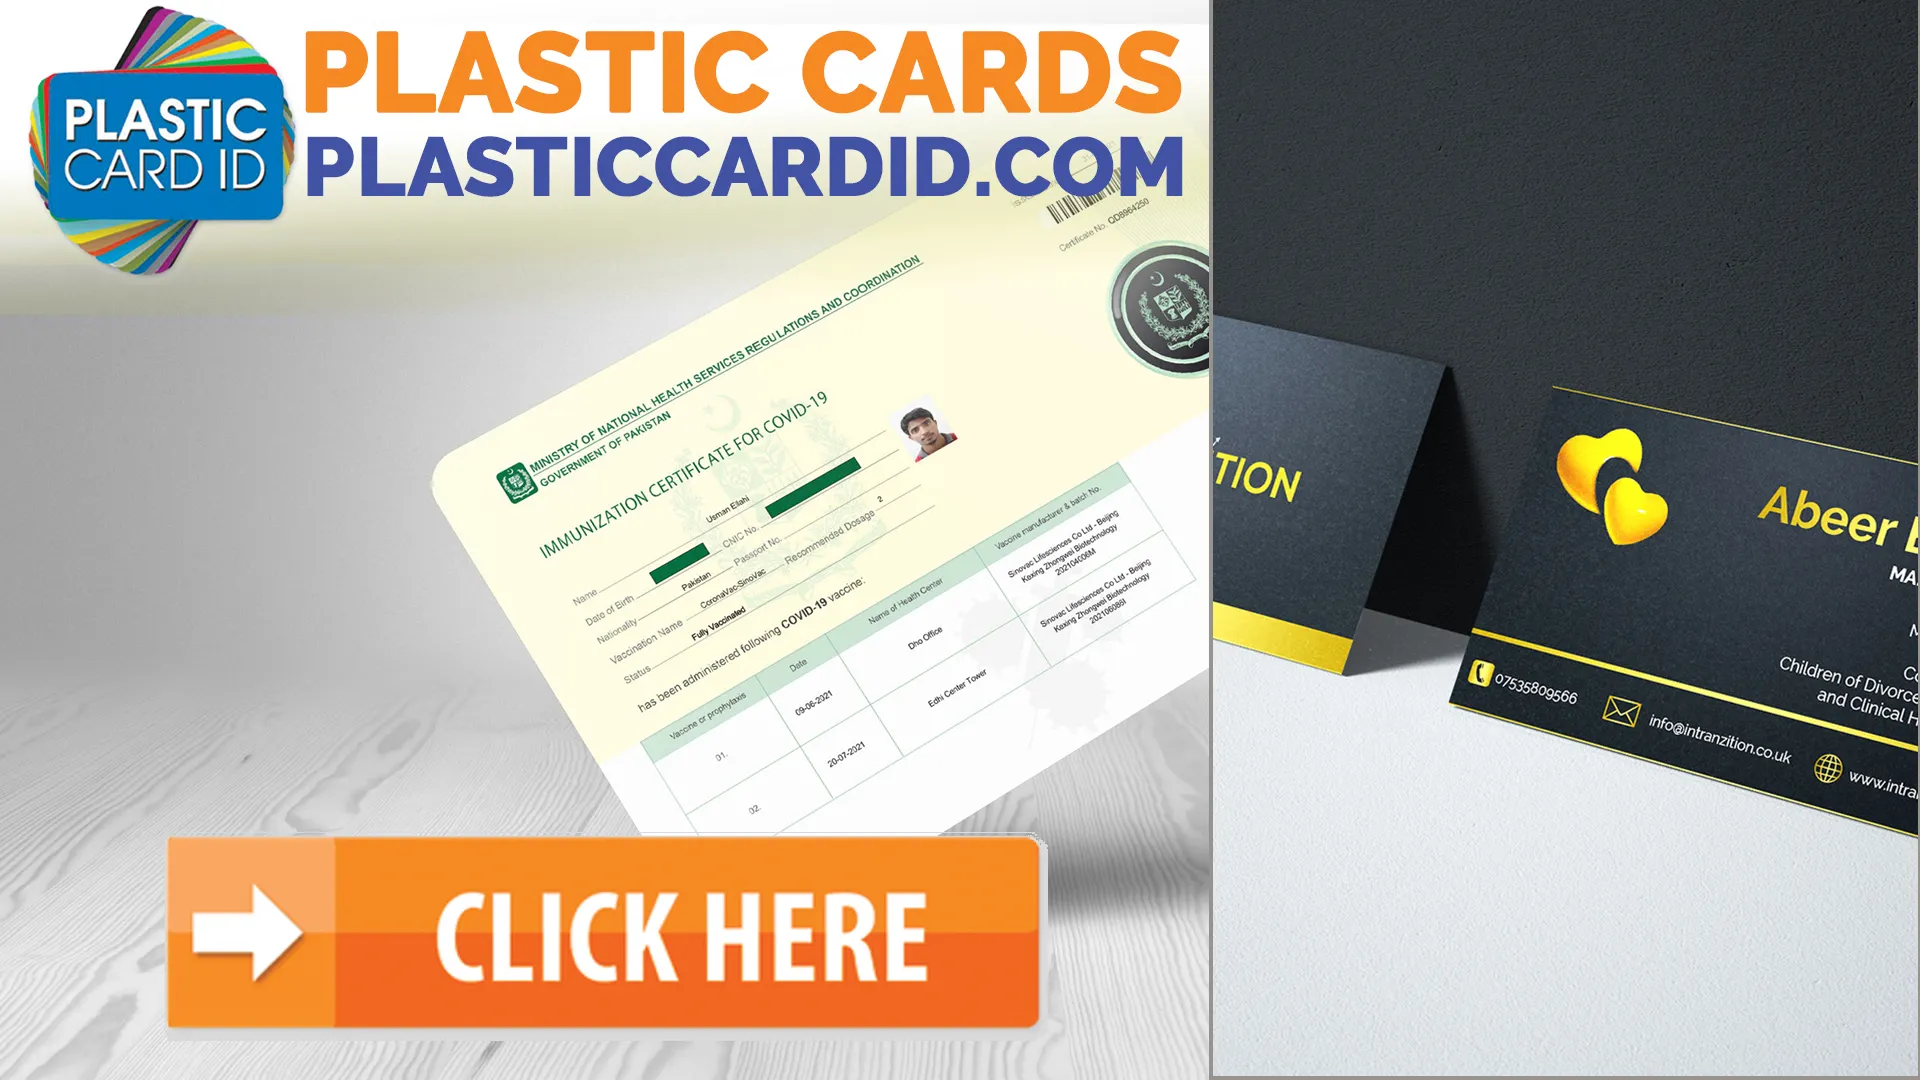 Drawing Attention to Your Booth with Dynamic Plastic Cards